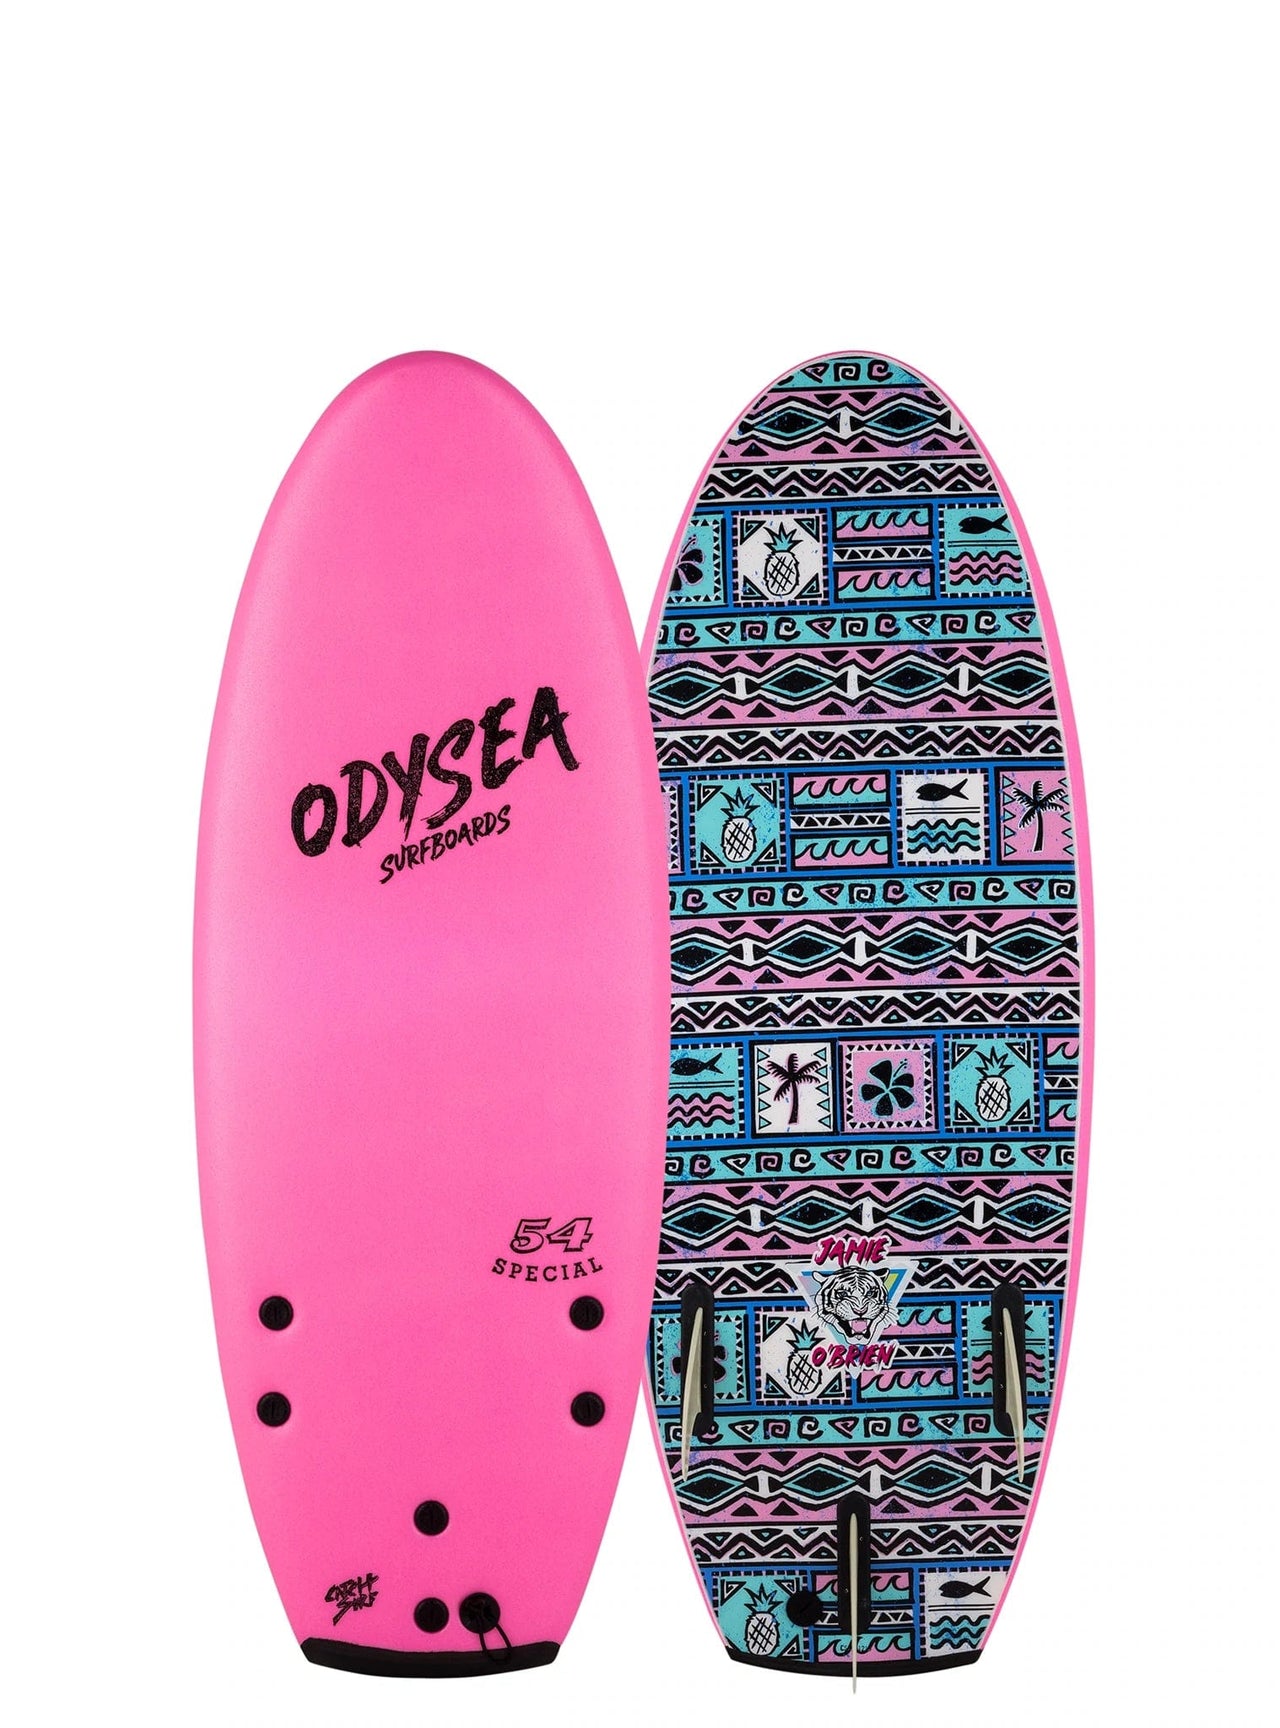 Catch Surf Odysea 54" Special Tri JOB PRO - Hot Pink - Good Wave